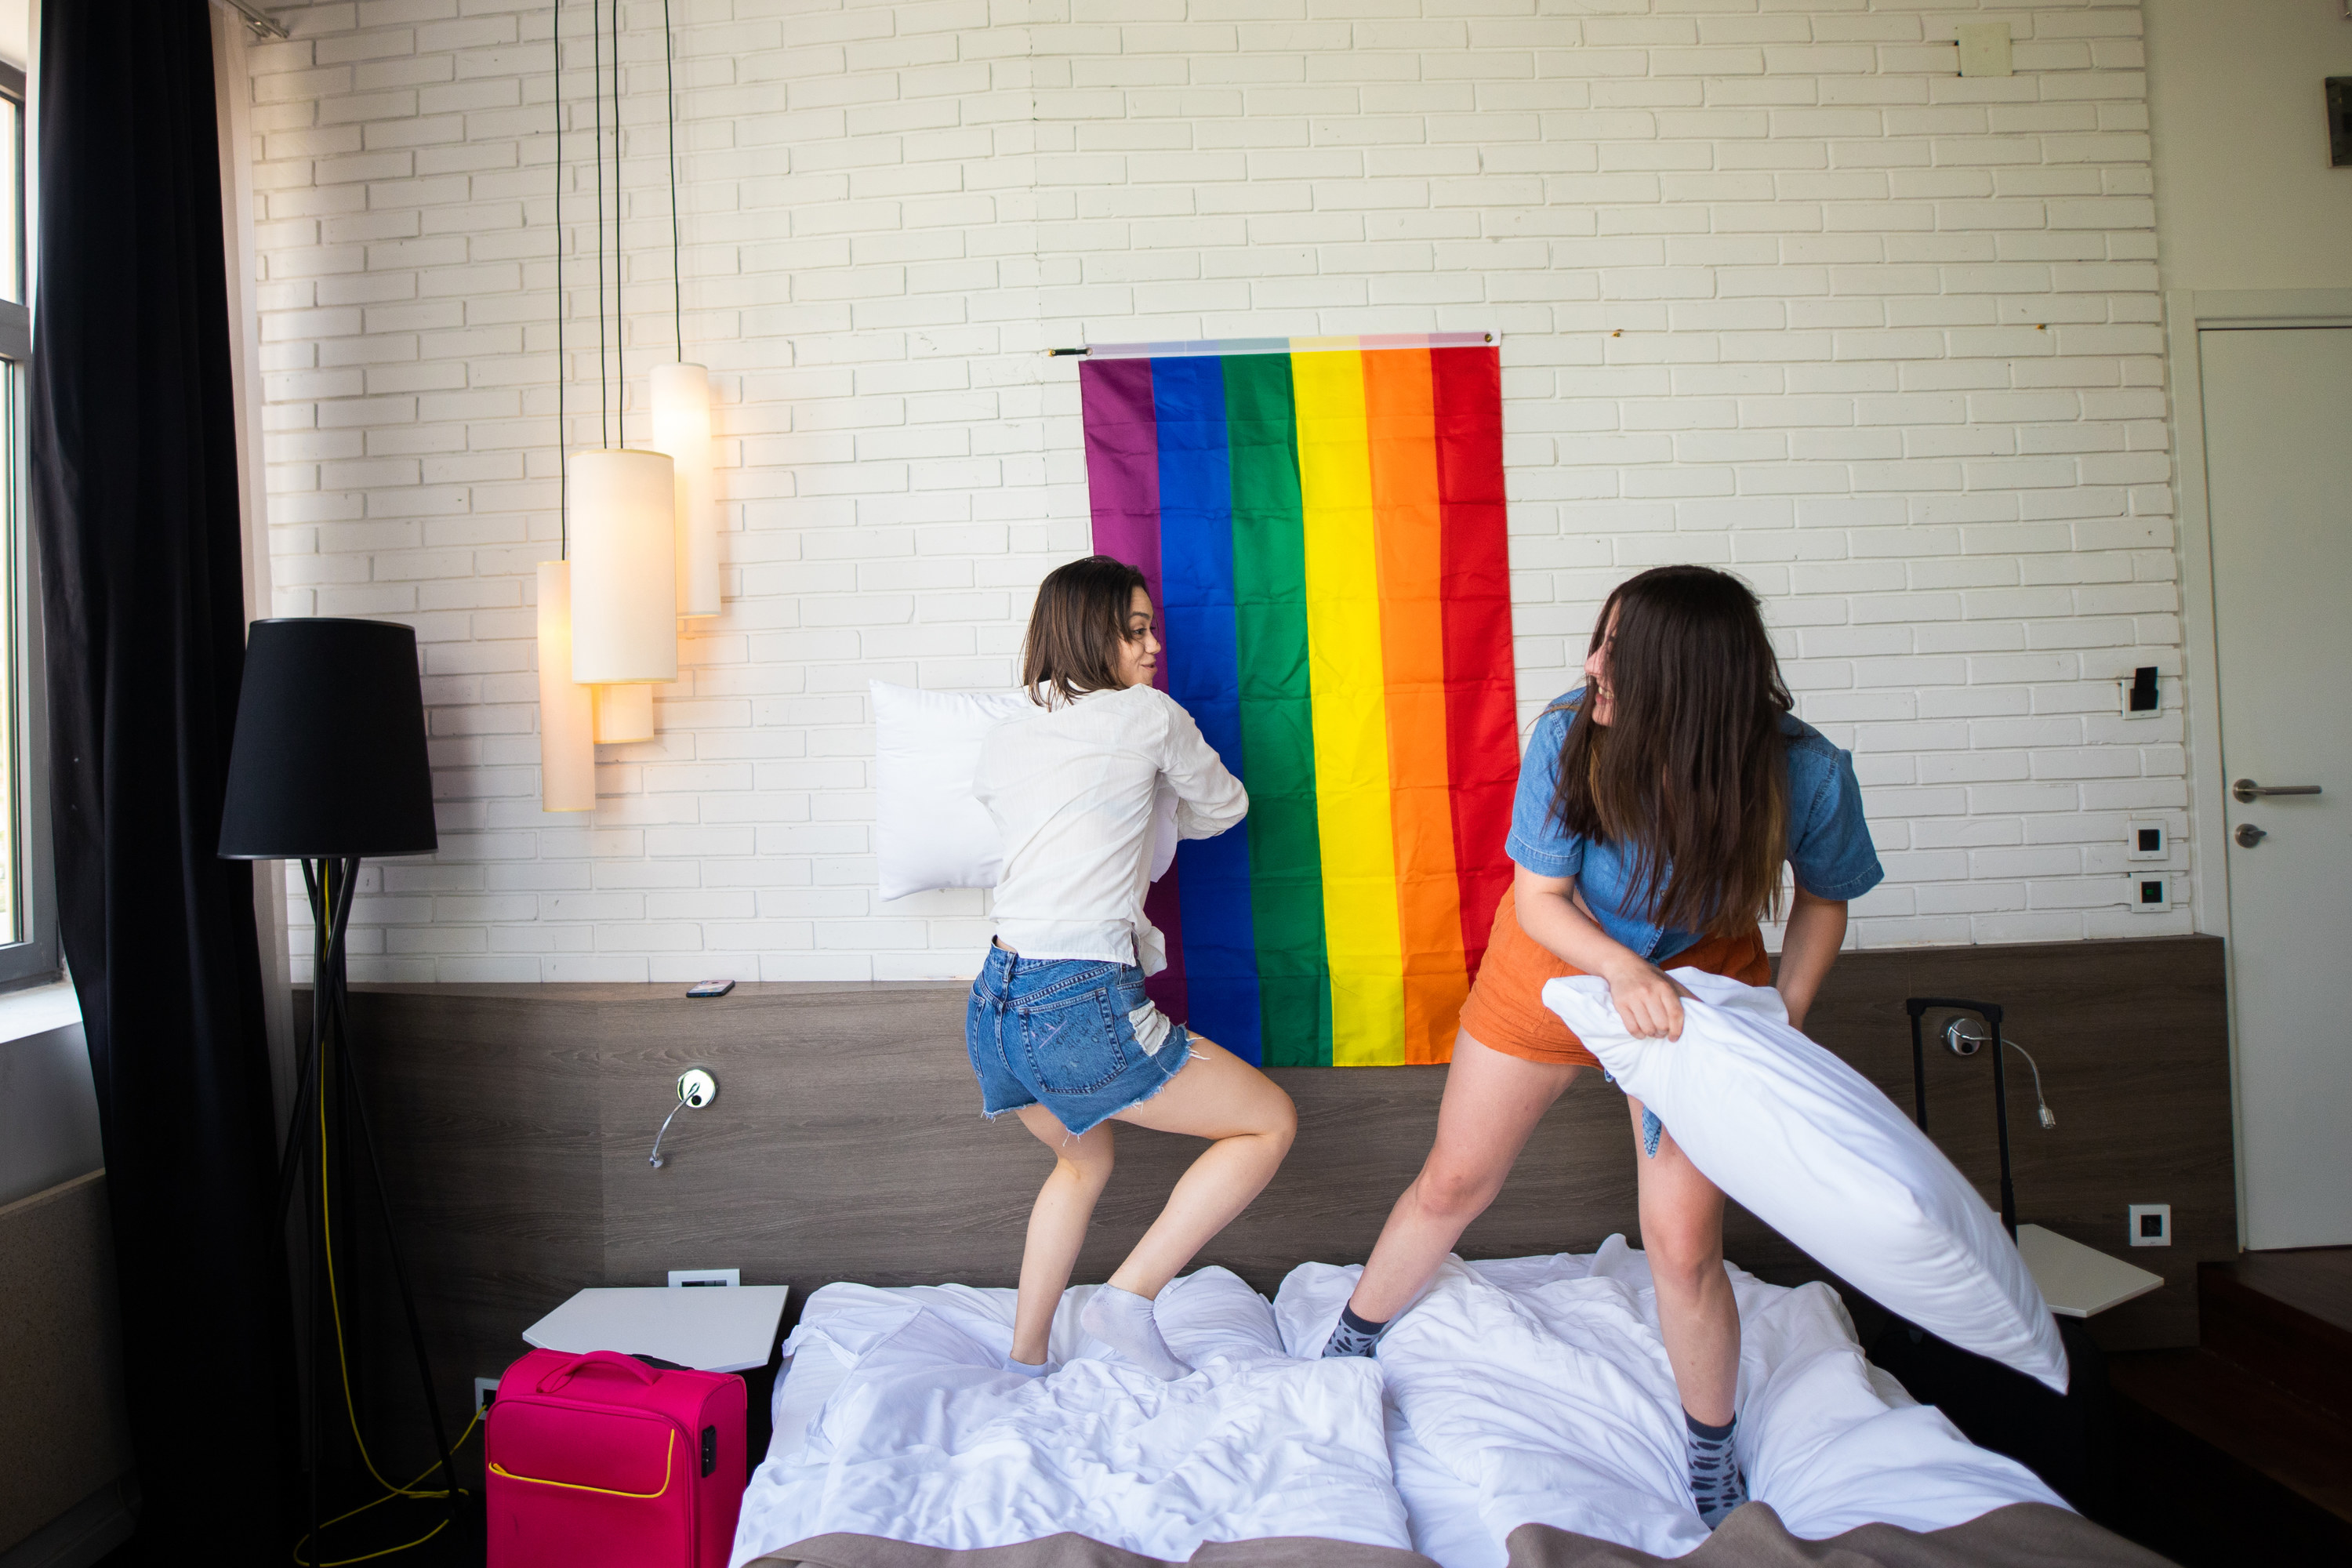 Two girls having pillow fight in hotel room